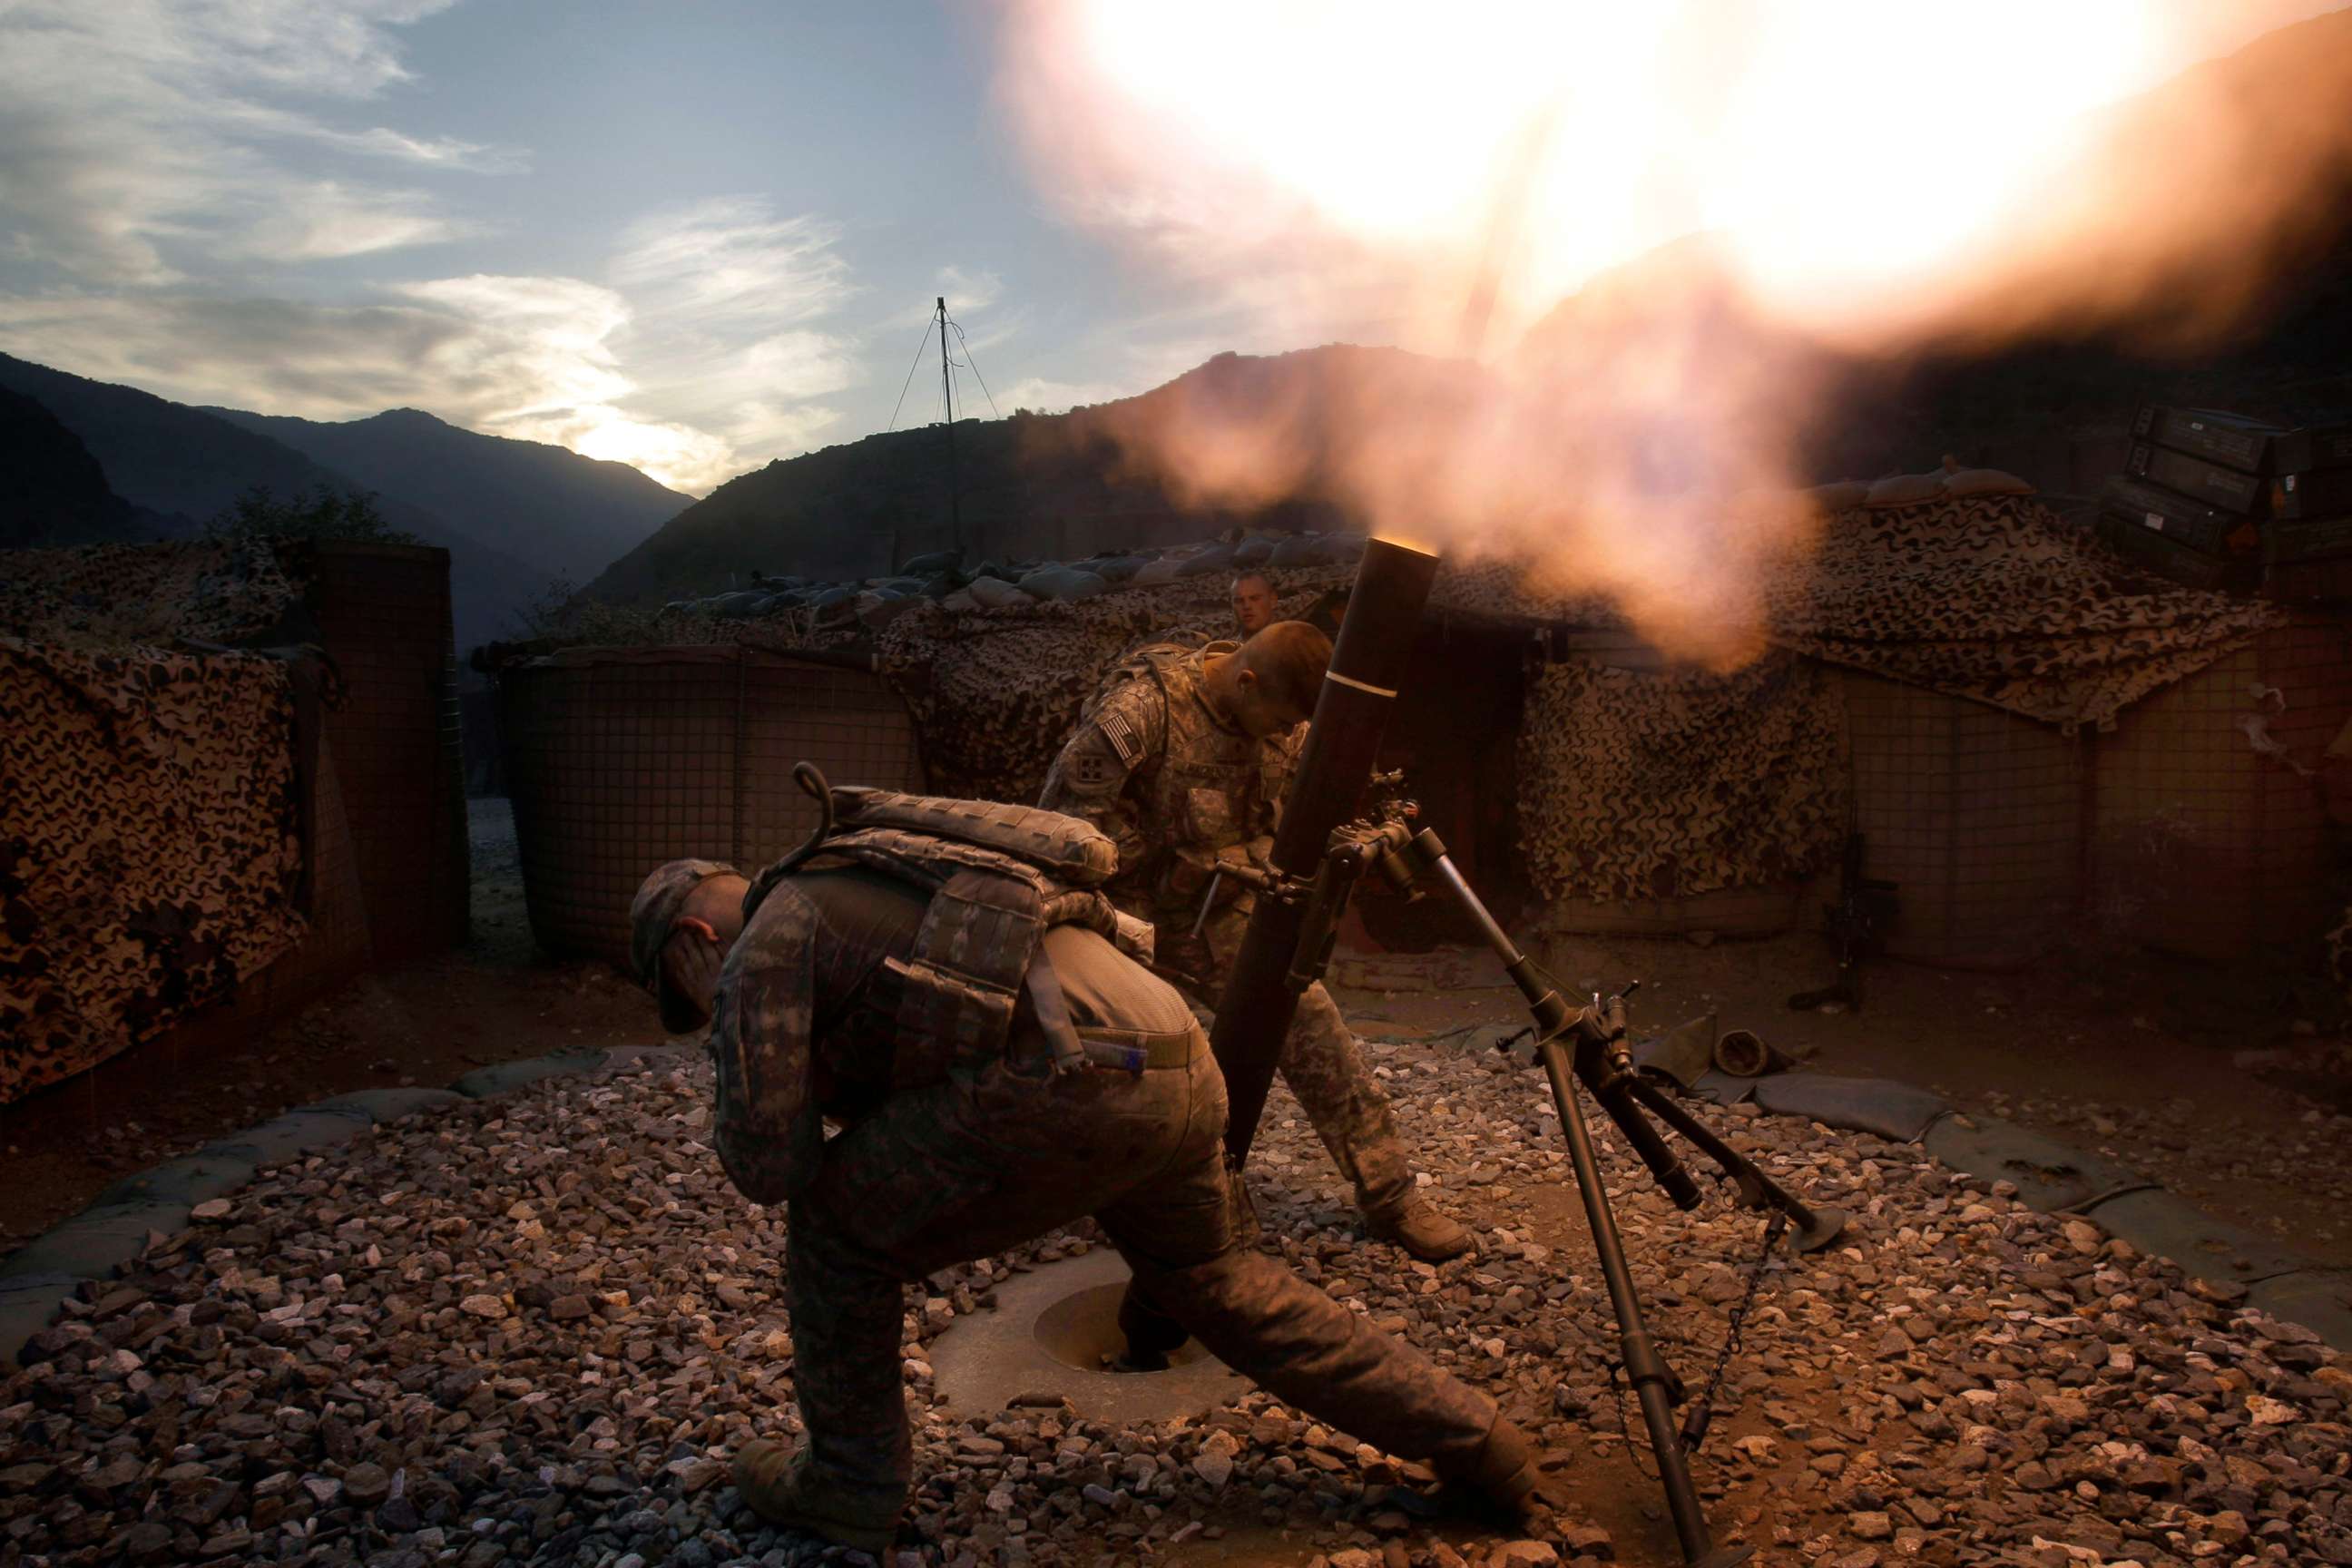 PHOTO: U.S. soldiers from the 2nd Battalion, 12th Infantry Regiment, 4th Brigade Combat Team, 4th Infantry Division fire mortars in the Pech Valley of Afghanistan's Kunar province, Oct. 26, 2009.